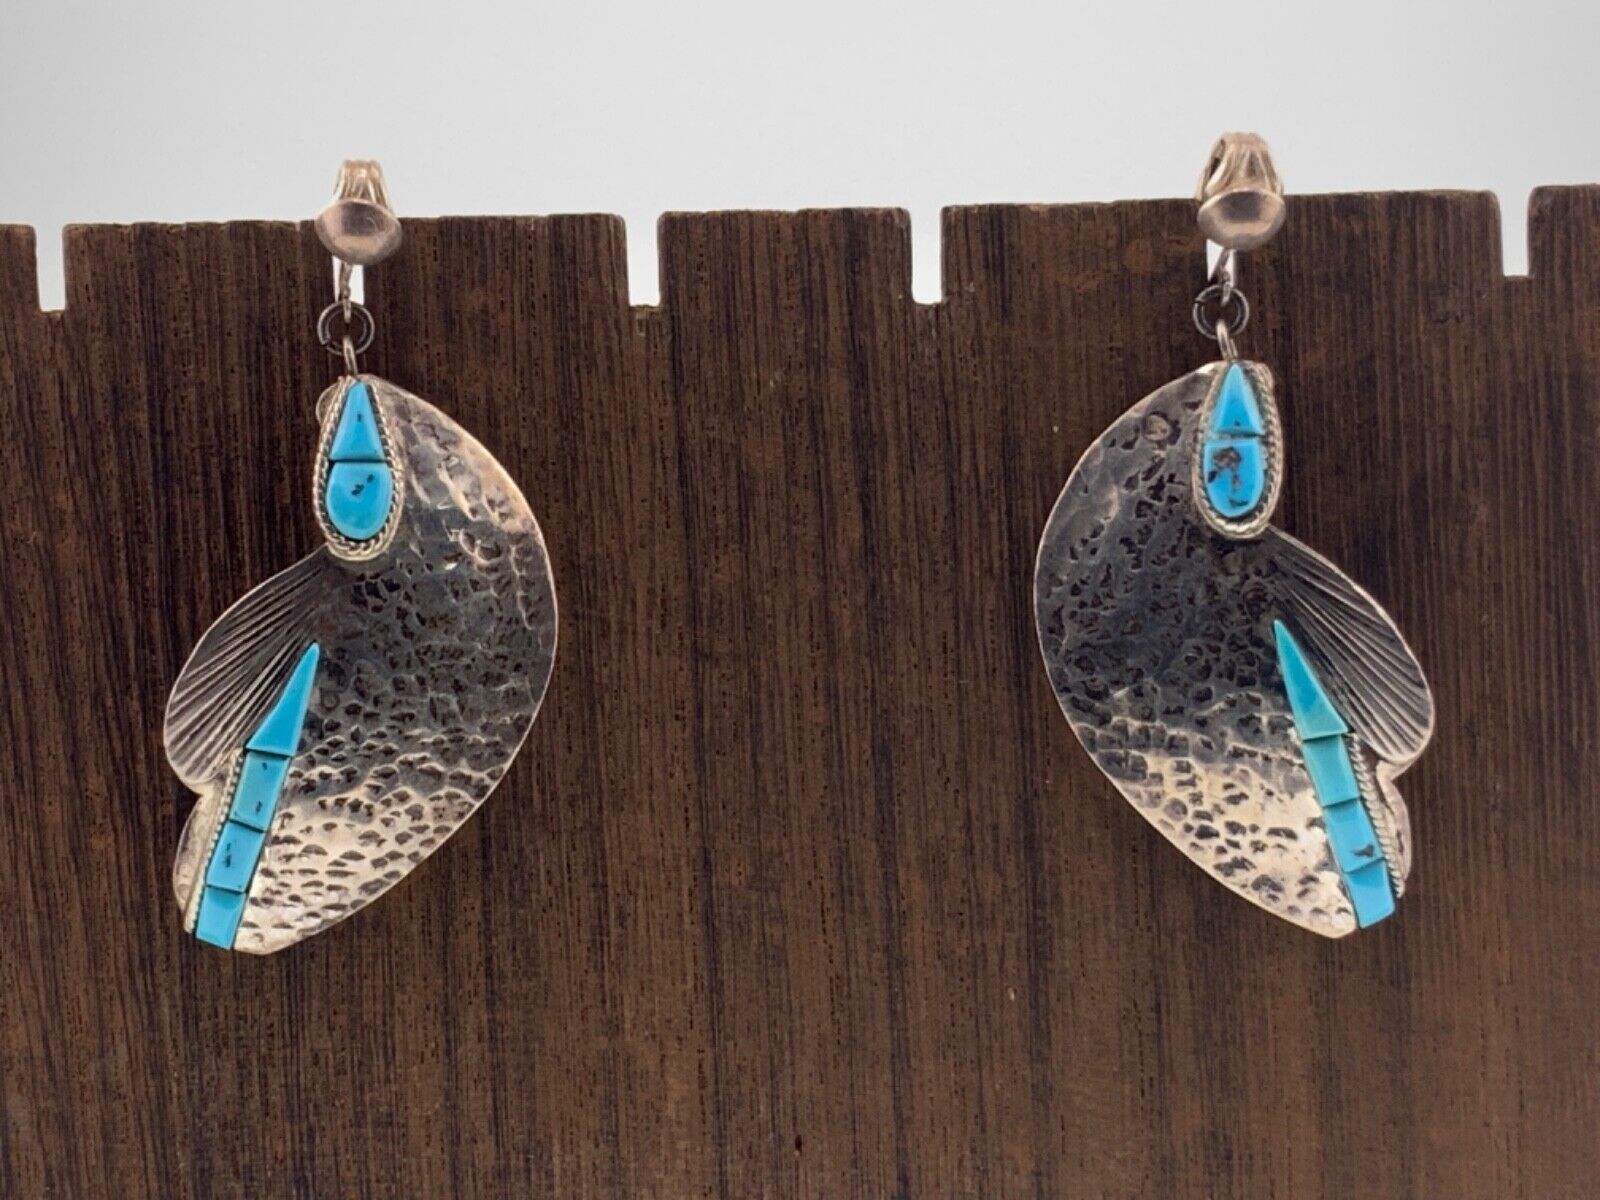 Large Vintage Navajo Sterling Earrings Signed S Ray Turquoise 925 Silver